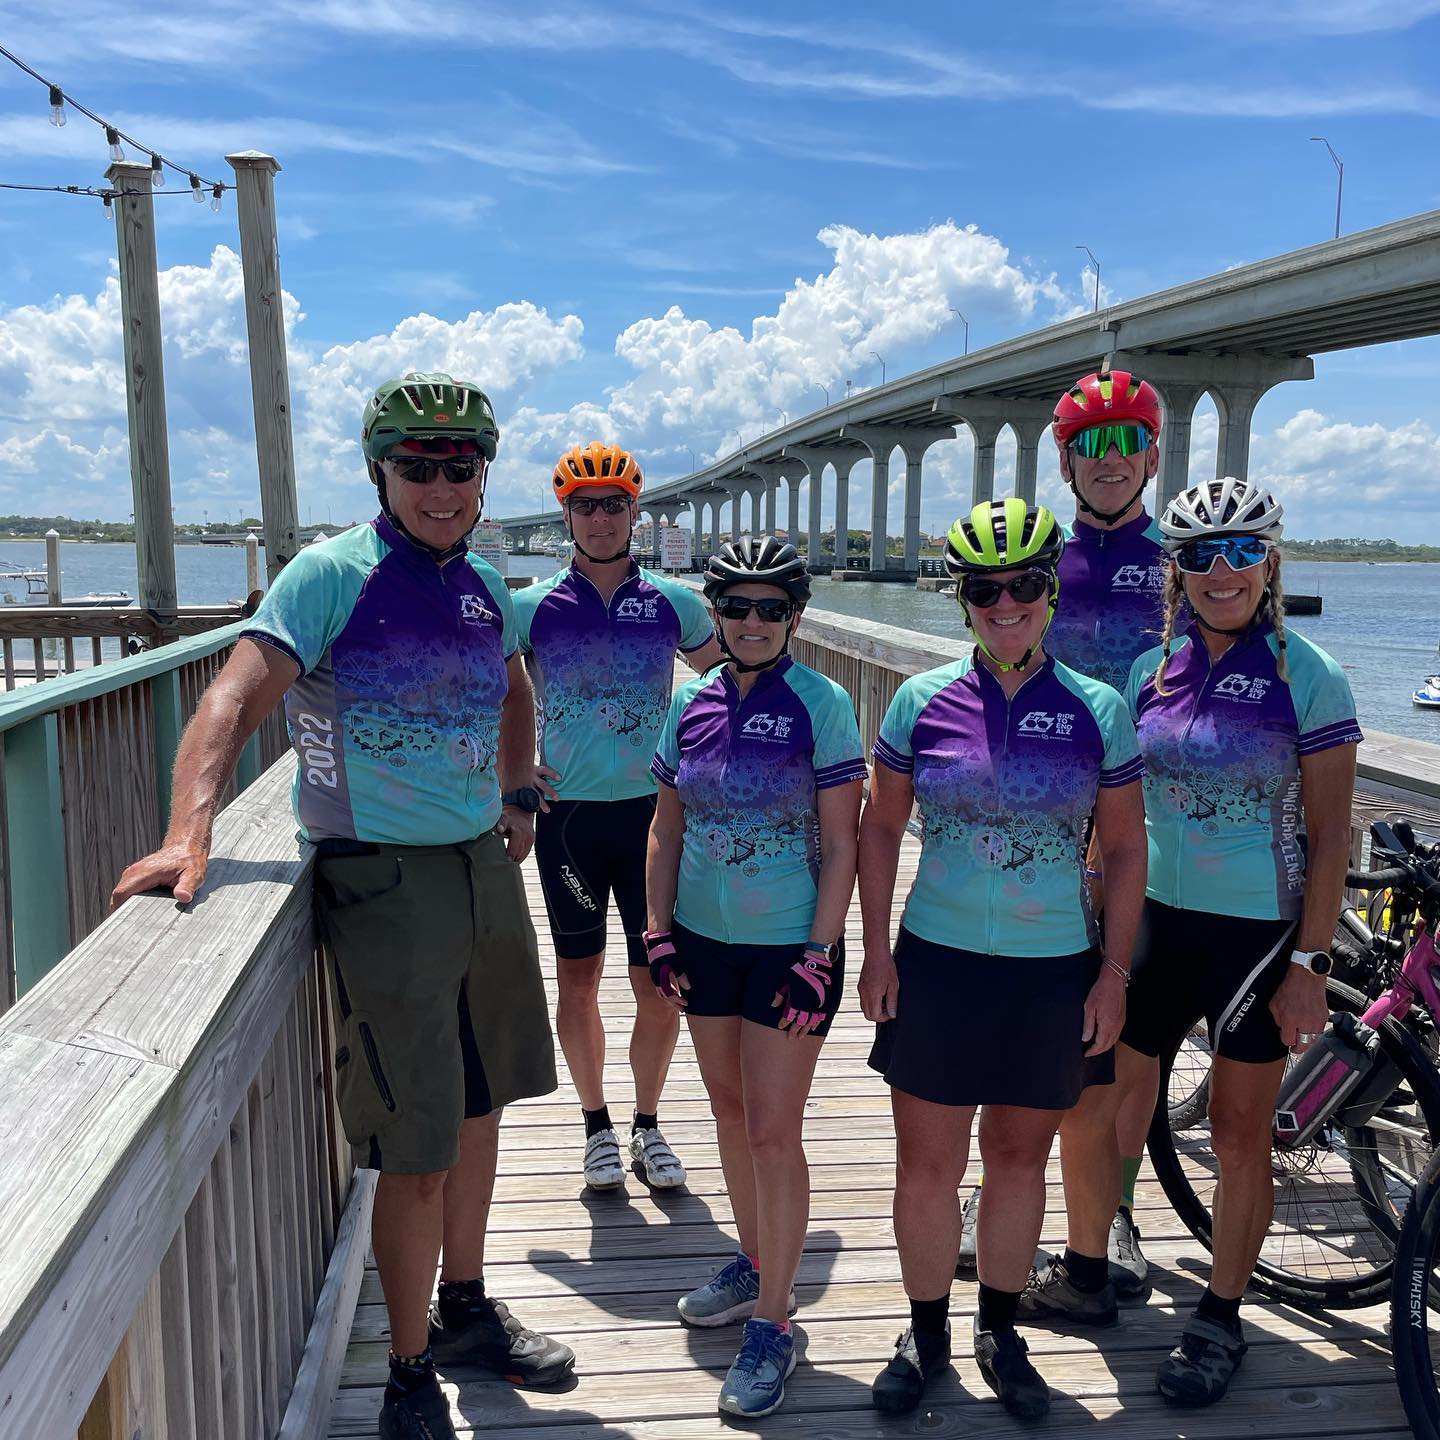 Team Biking to Remember, a group from Cedar Rapids, rode more than 3,000 miles on their bikes to help raise money and awareness for the Alzheimer’s Association’s The Longest Day campaign.